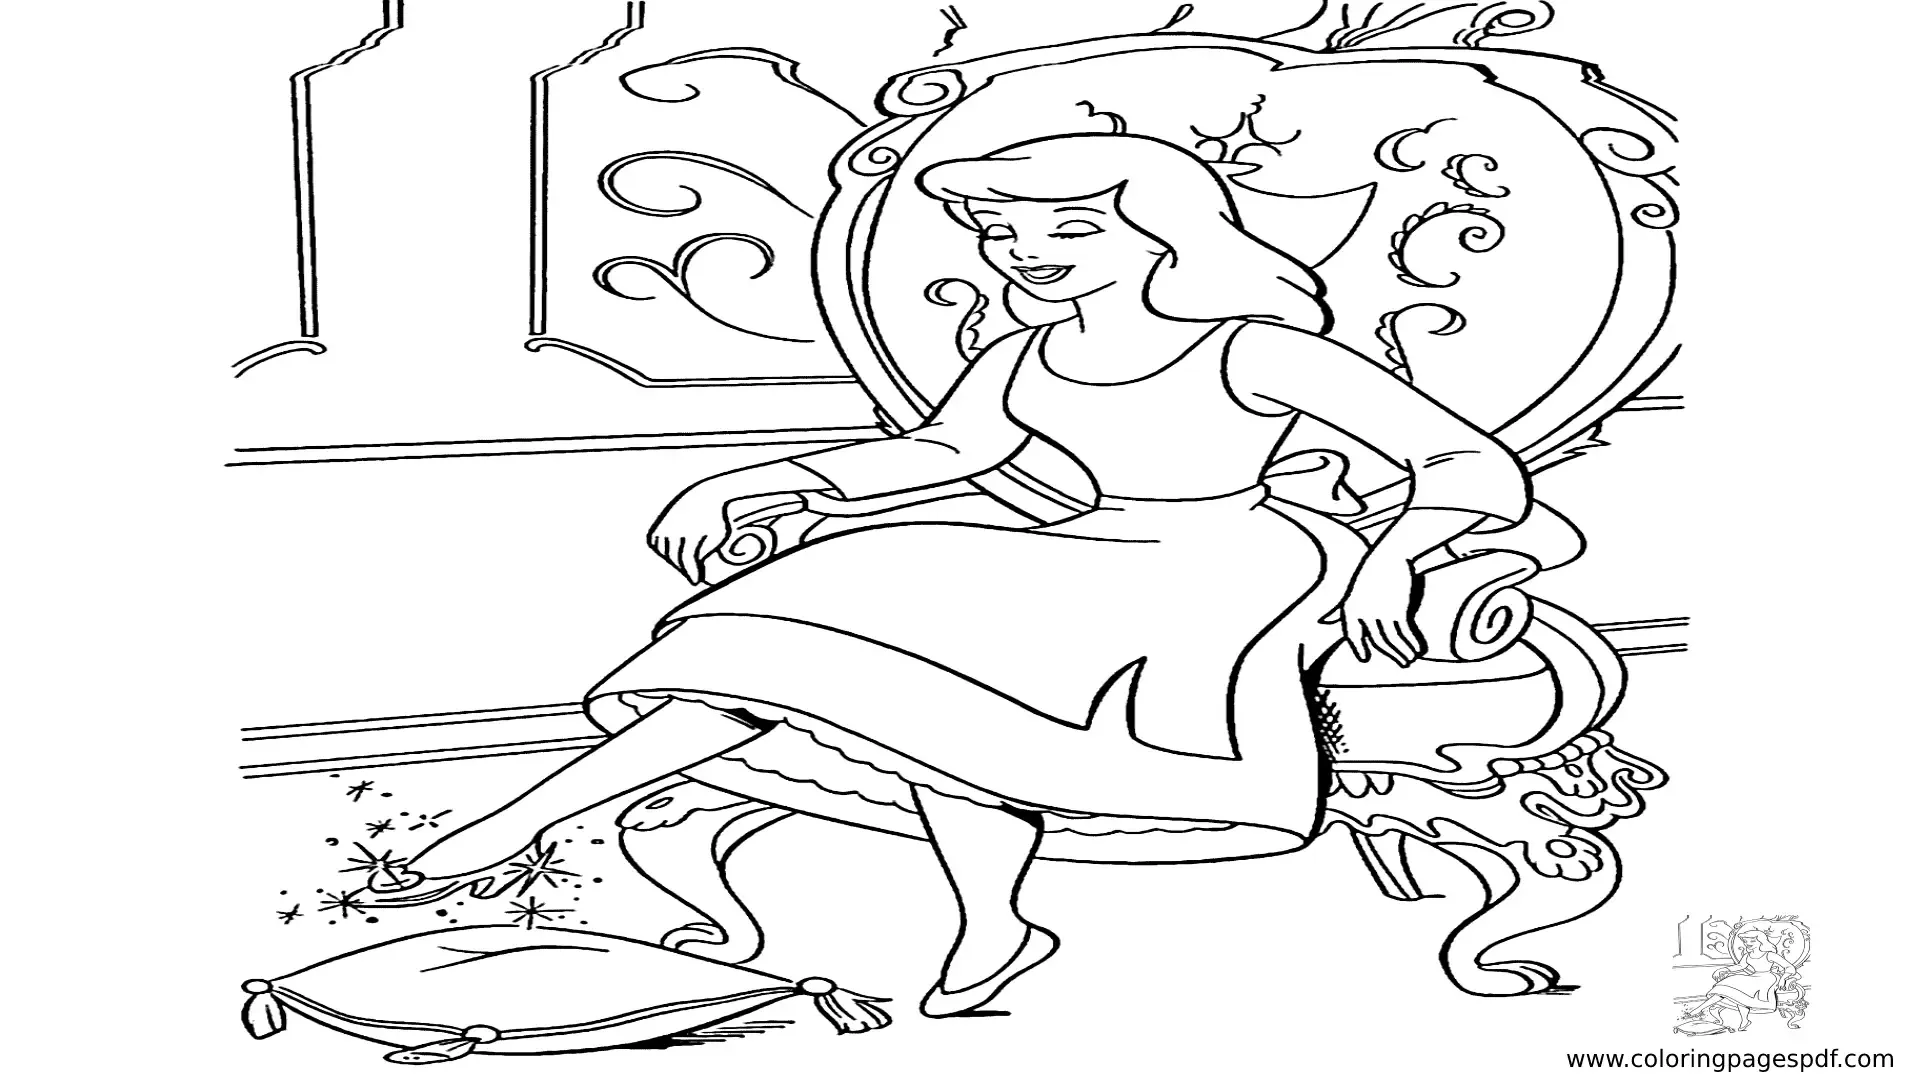 Coloring Pages Of Cinderella Wearing Her Glass Slipper